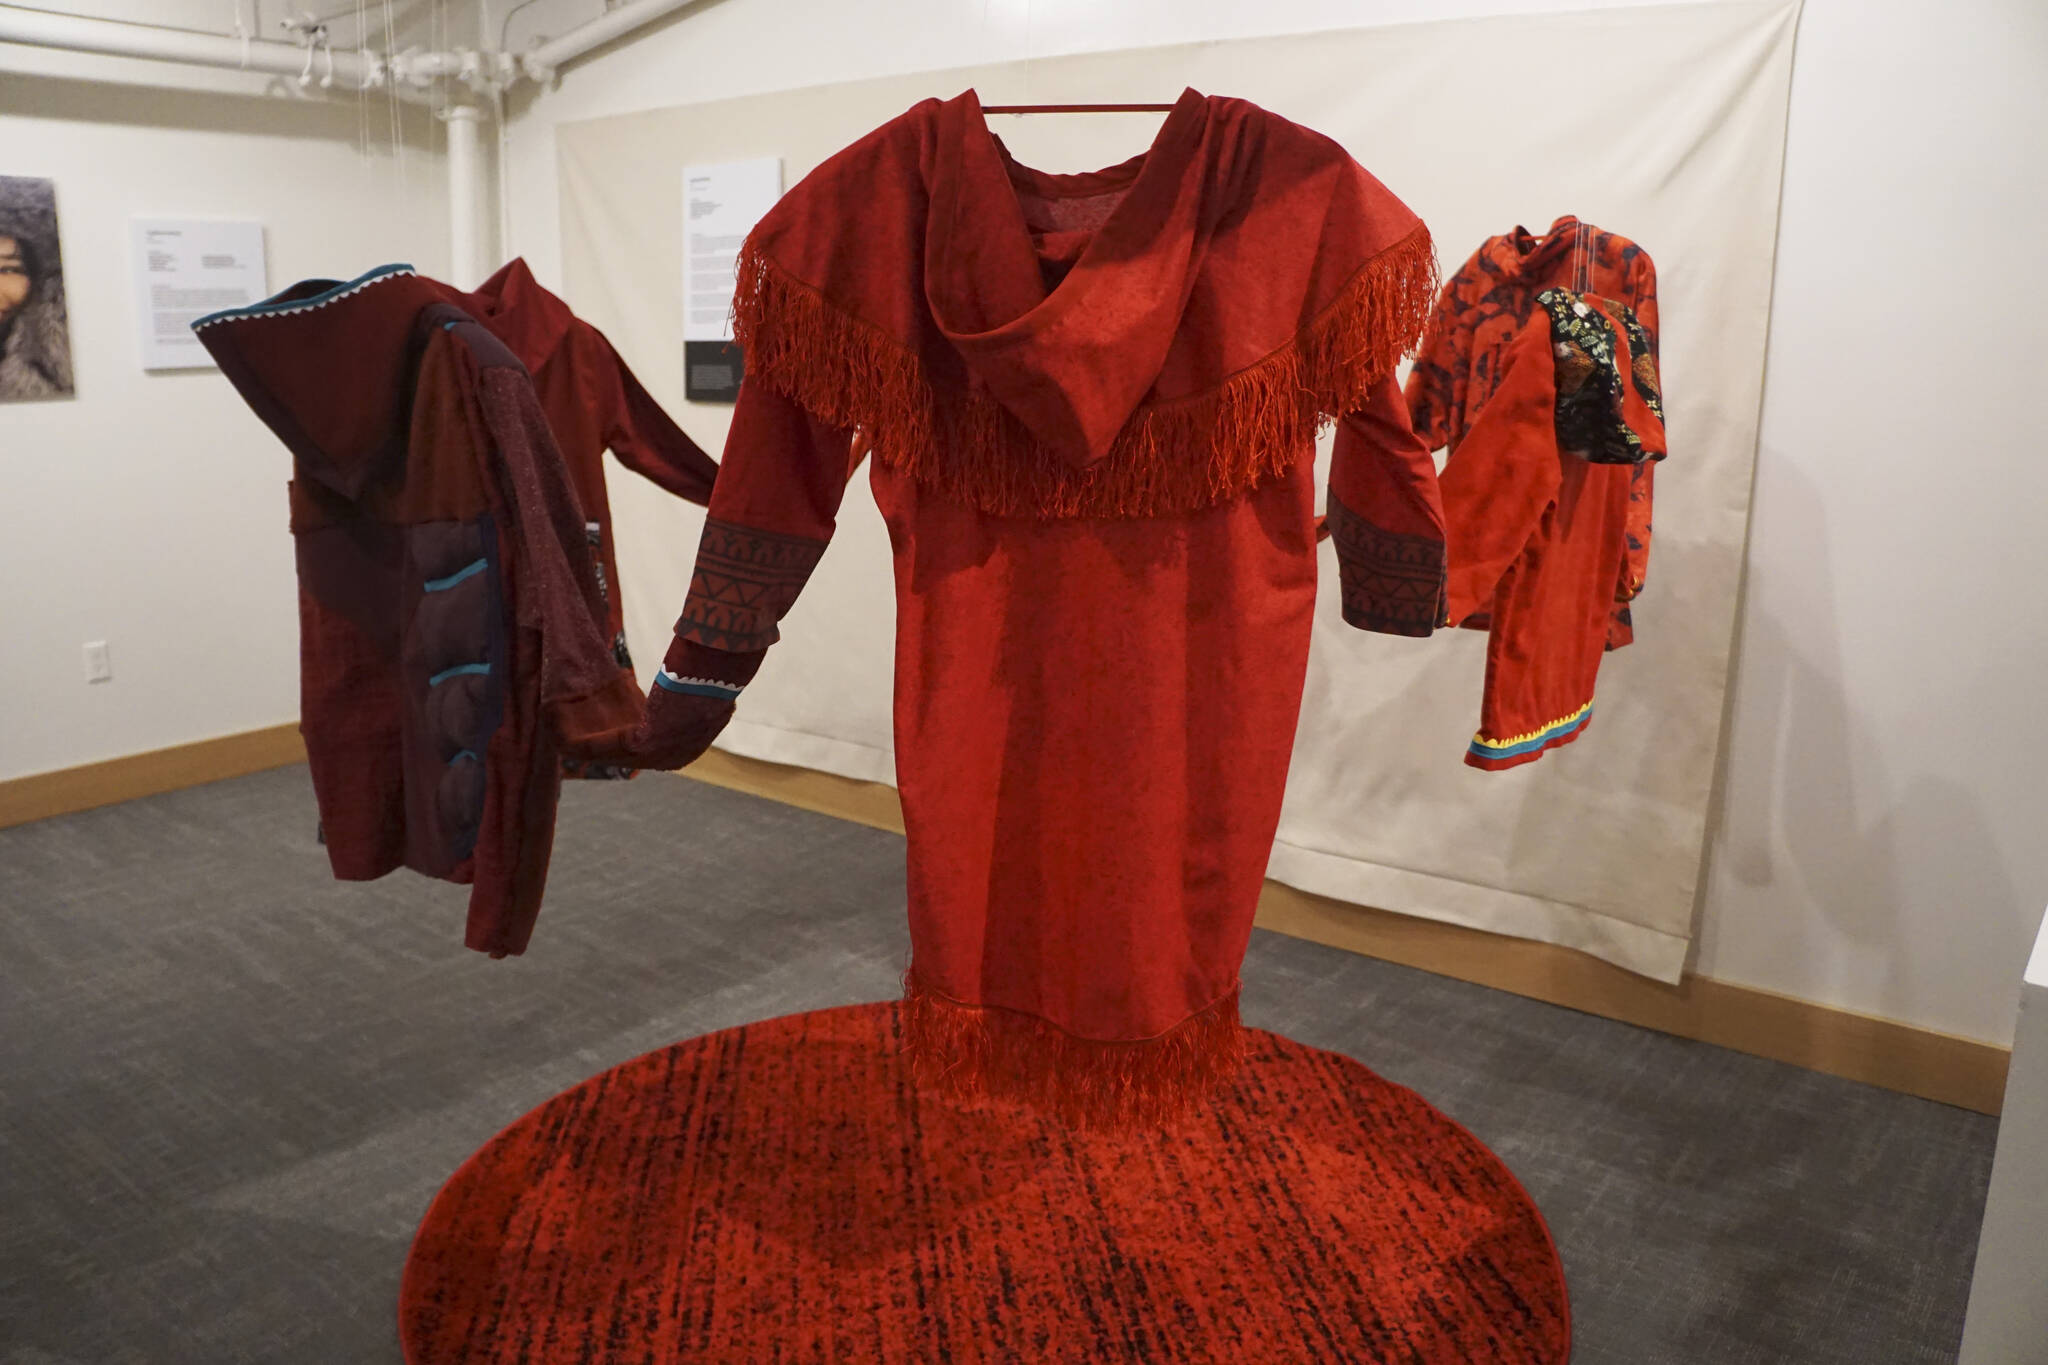 Bobby Qaluktaksraq Brower of Utqiagvik invited other Indigenous women to sew atikluks in memory of missing and murdered Indigenous women. The collection, “Healing Stitches,” includes works by Brower, Melissa Ahnroorik Ahlooruk Ingersoll of Nome, Cassandra Tikasuk Johnson of Unalakleet, Jackie QataliñaSchaeffer of Kotzebue and Beverly Tuck of St. Paul. The art is part of “Protection: Adaptation and Resistance,” on exhibit at the Pratt Museum & Park in Homer, Alaska, through Sept. 24, 2022. (Photo by Michael Armstrong/Homer News)